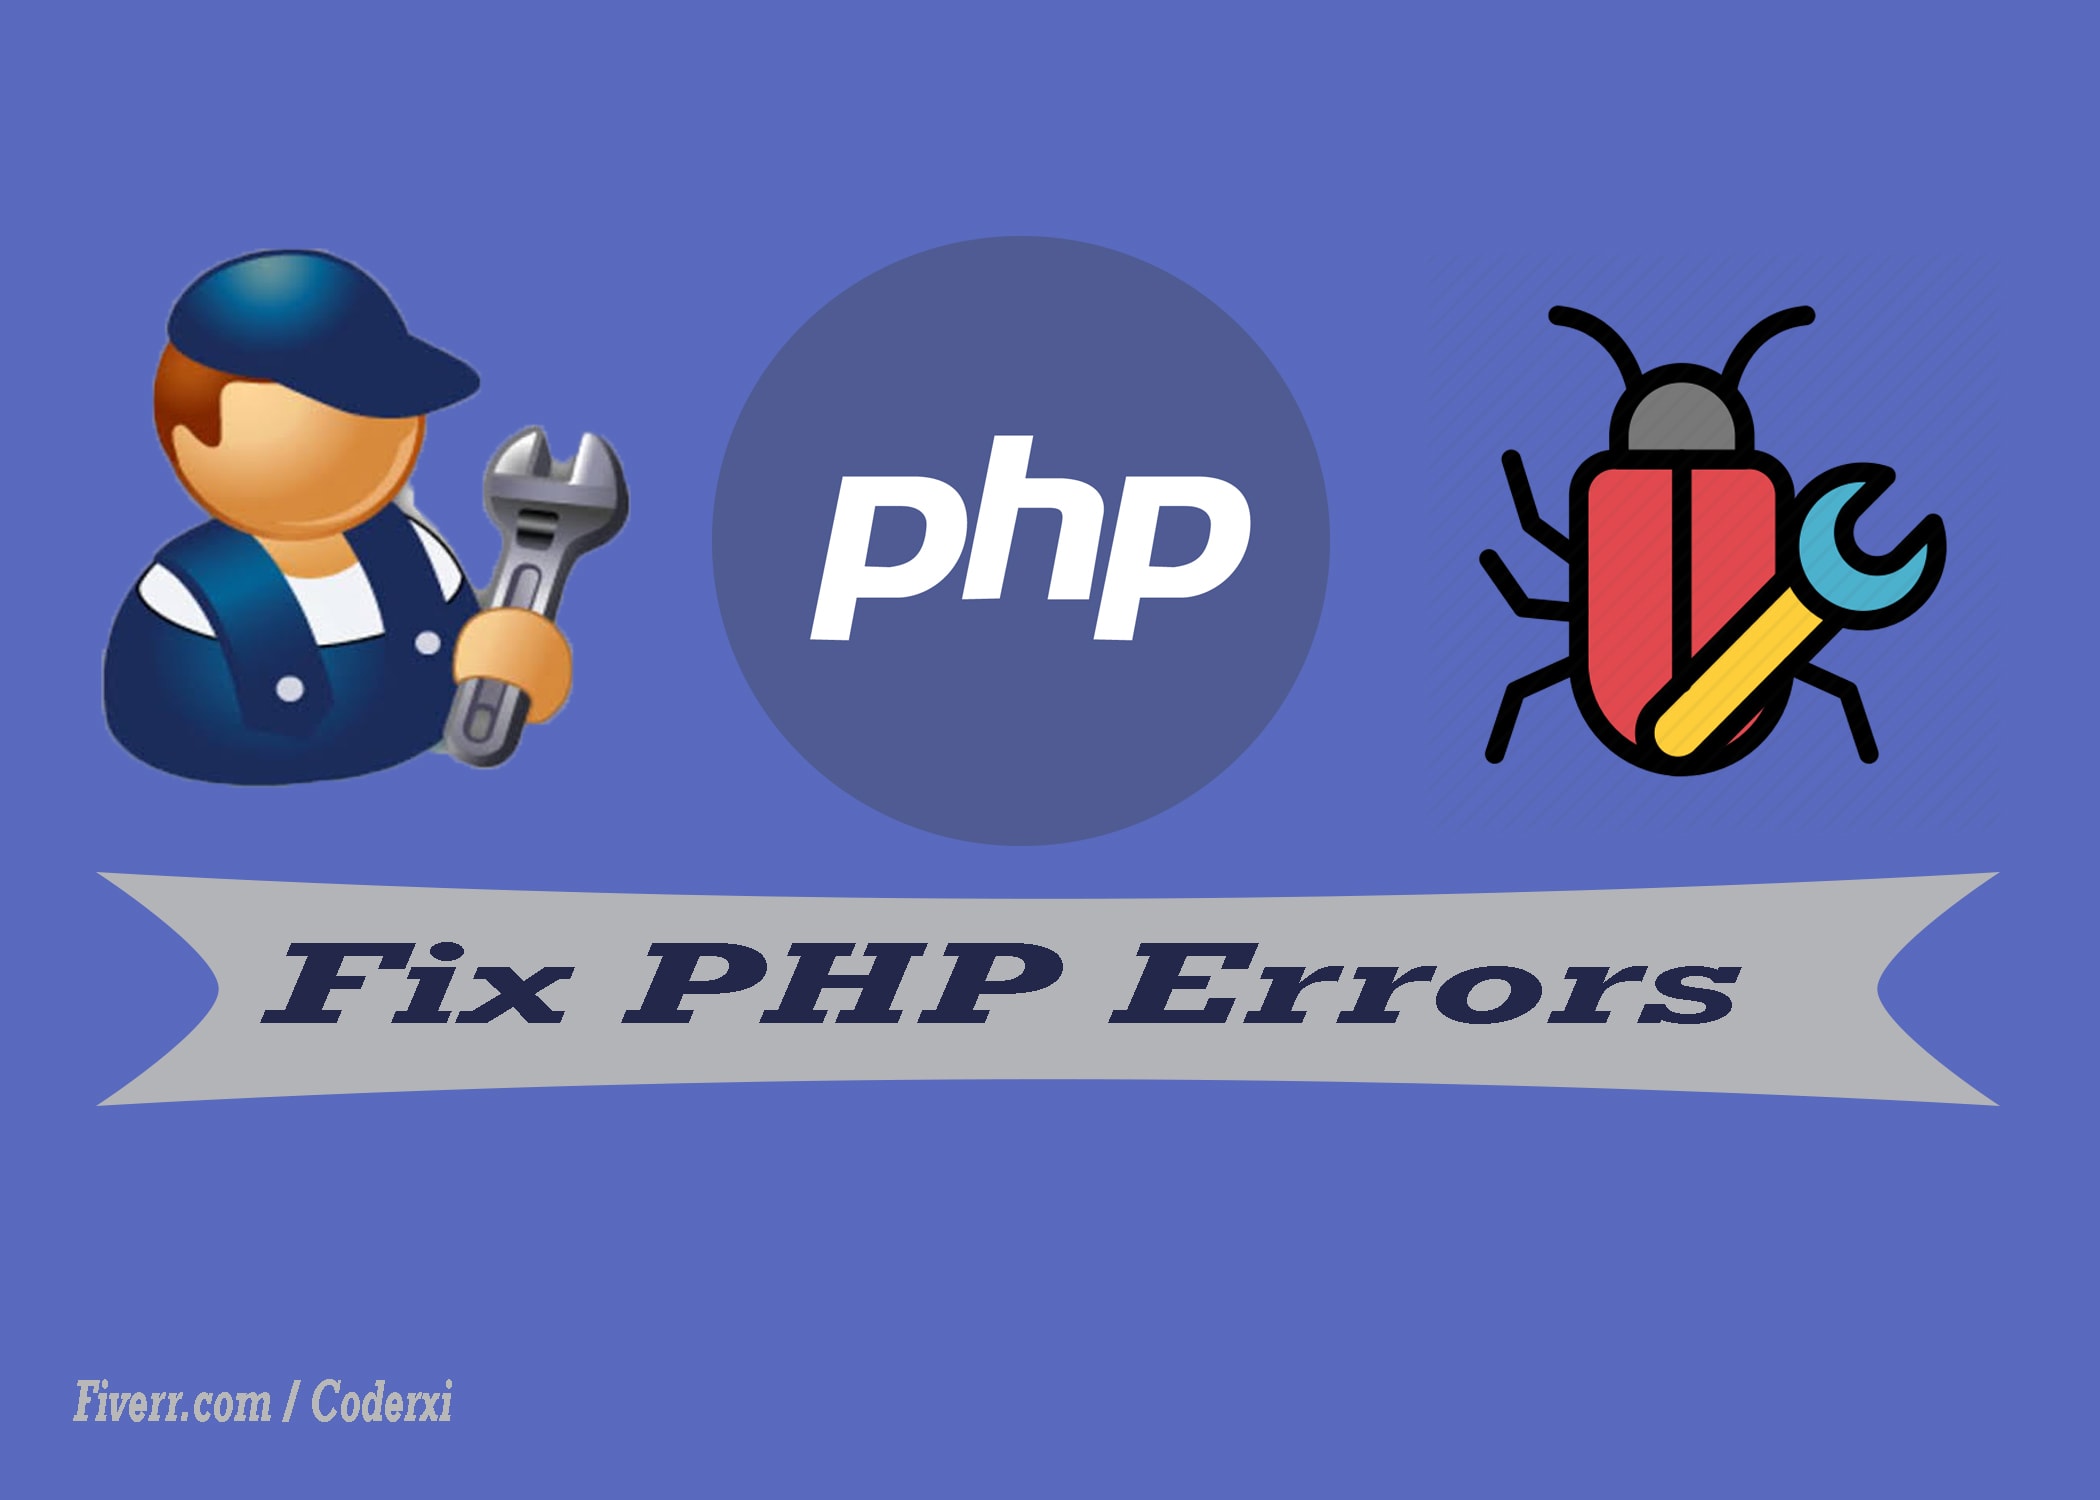 Php scripts for websites